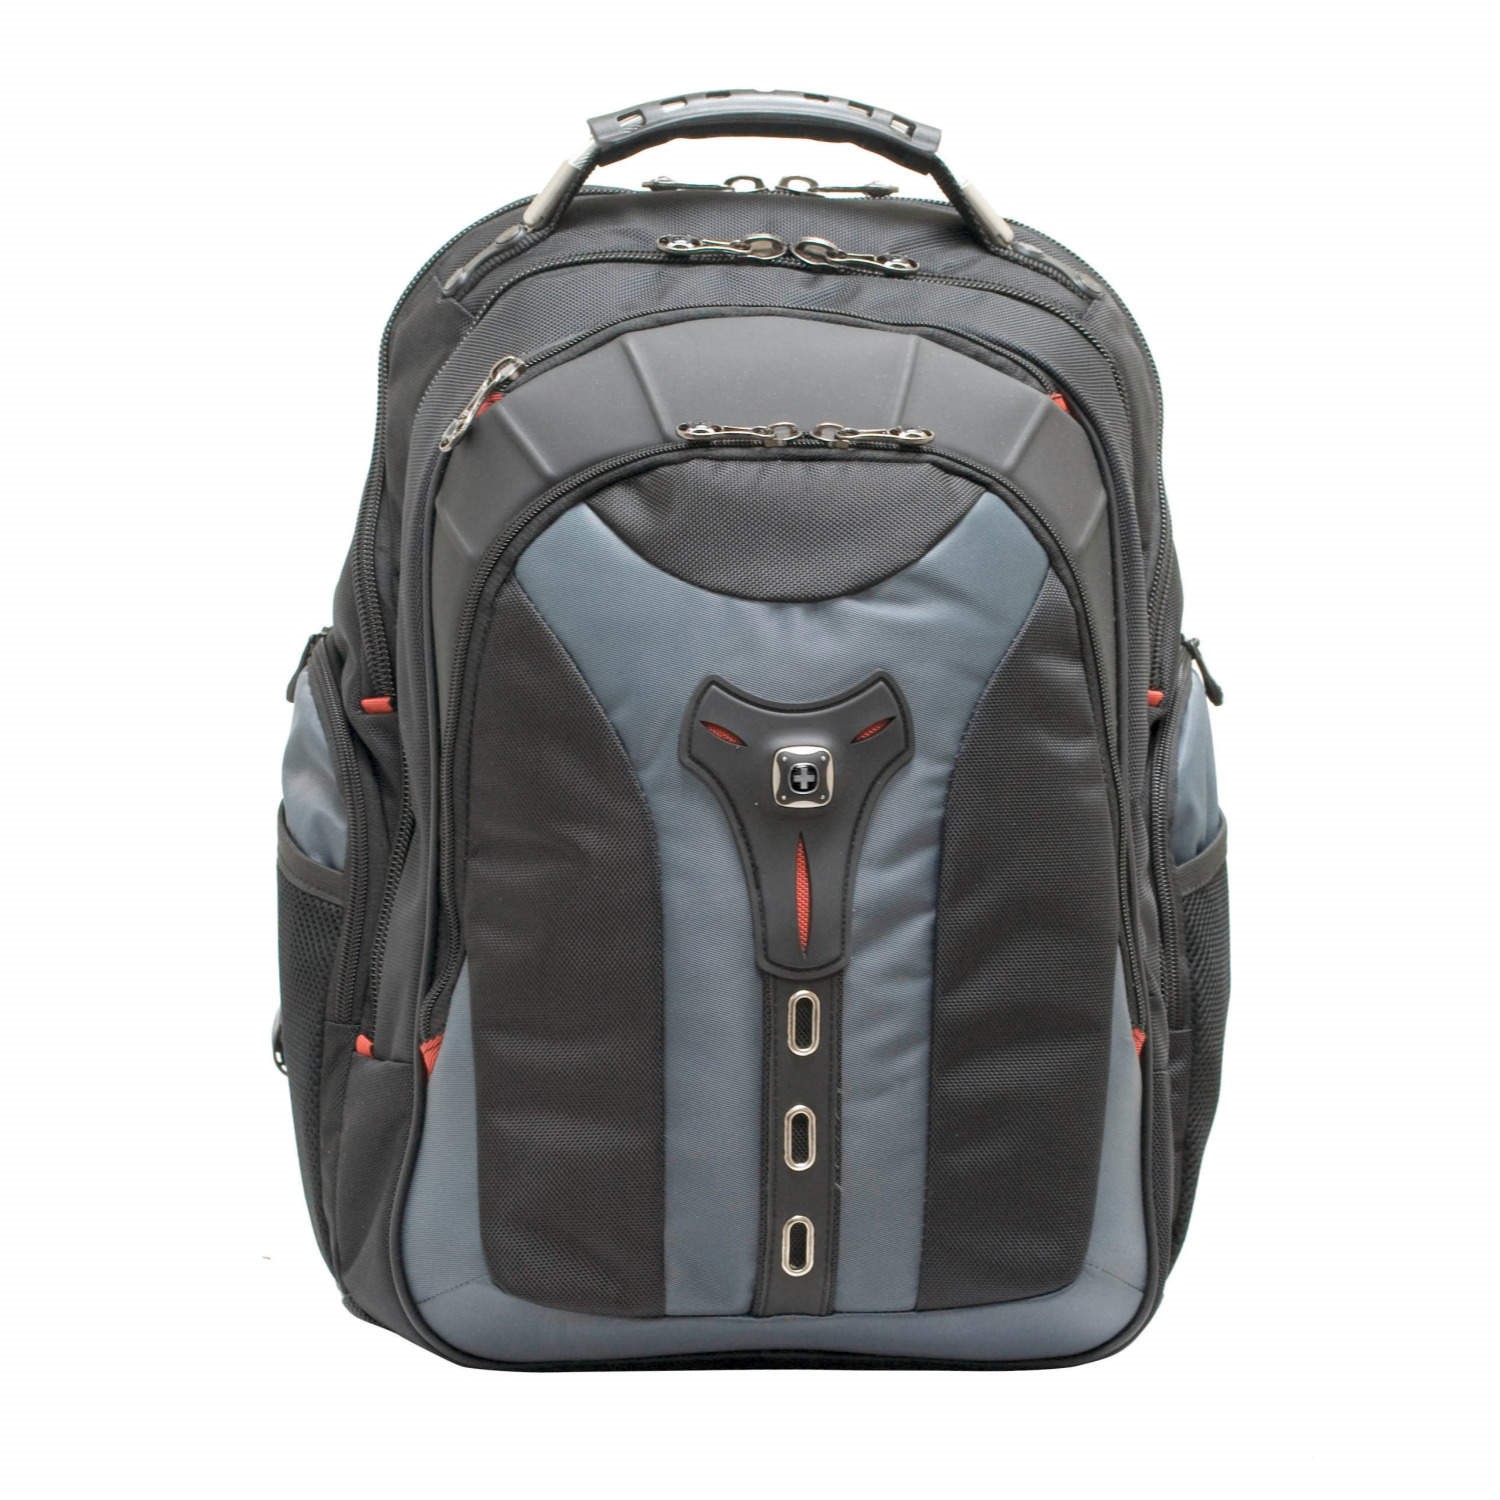 Wenger Swissgear Pegasus Backpack for Laptops up to 17.3